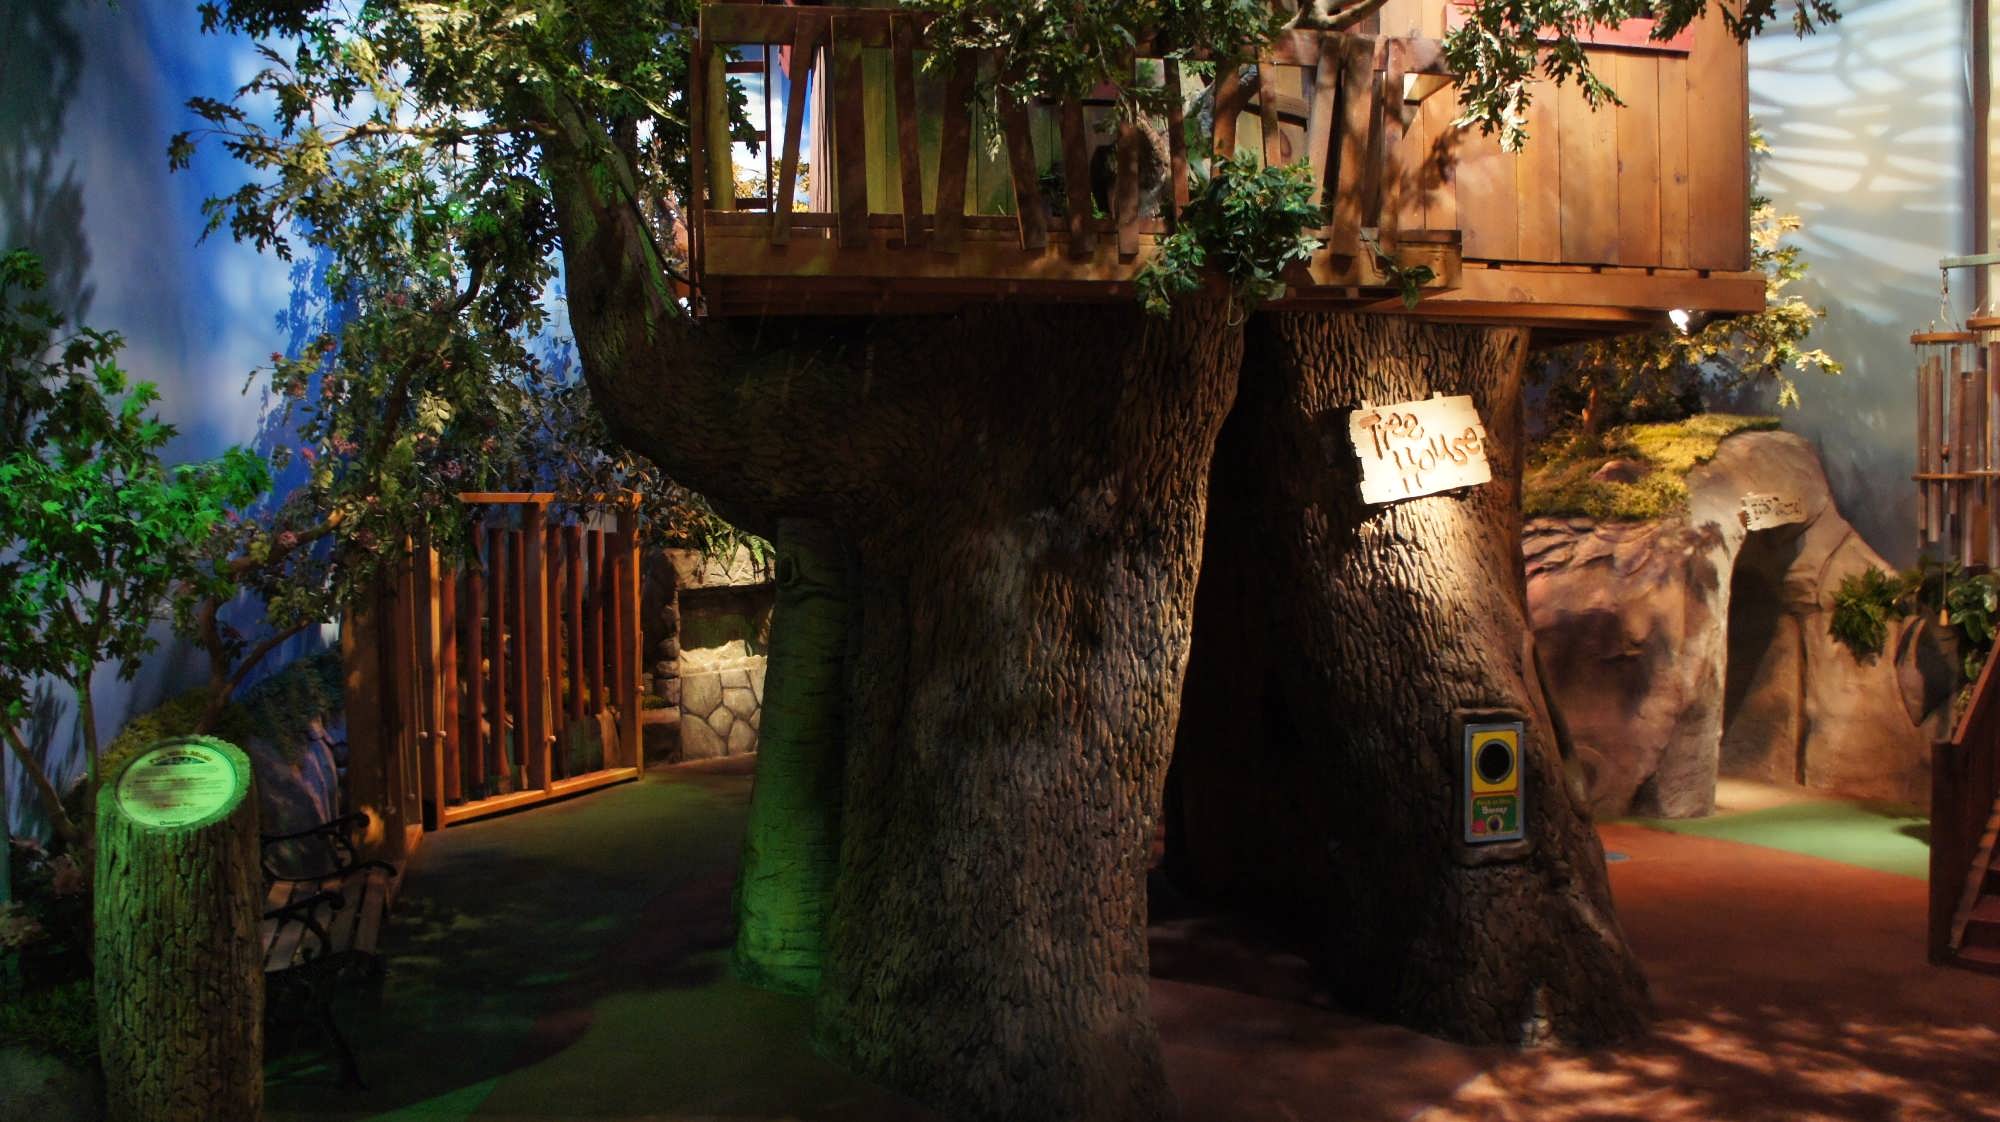 Barney’s Backyard features this tree house and much more